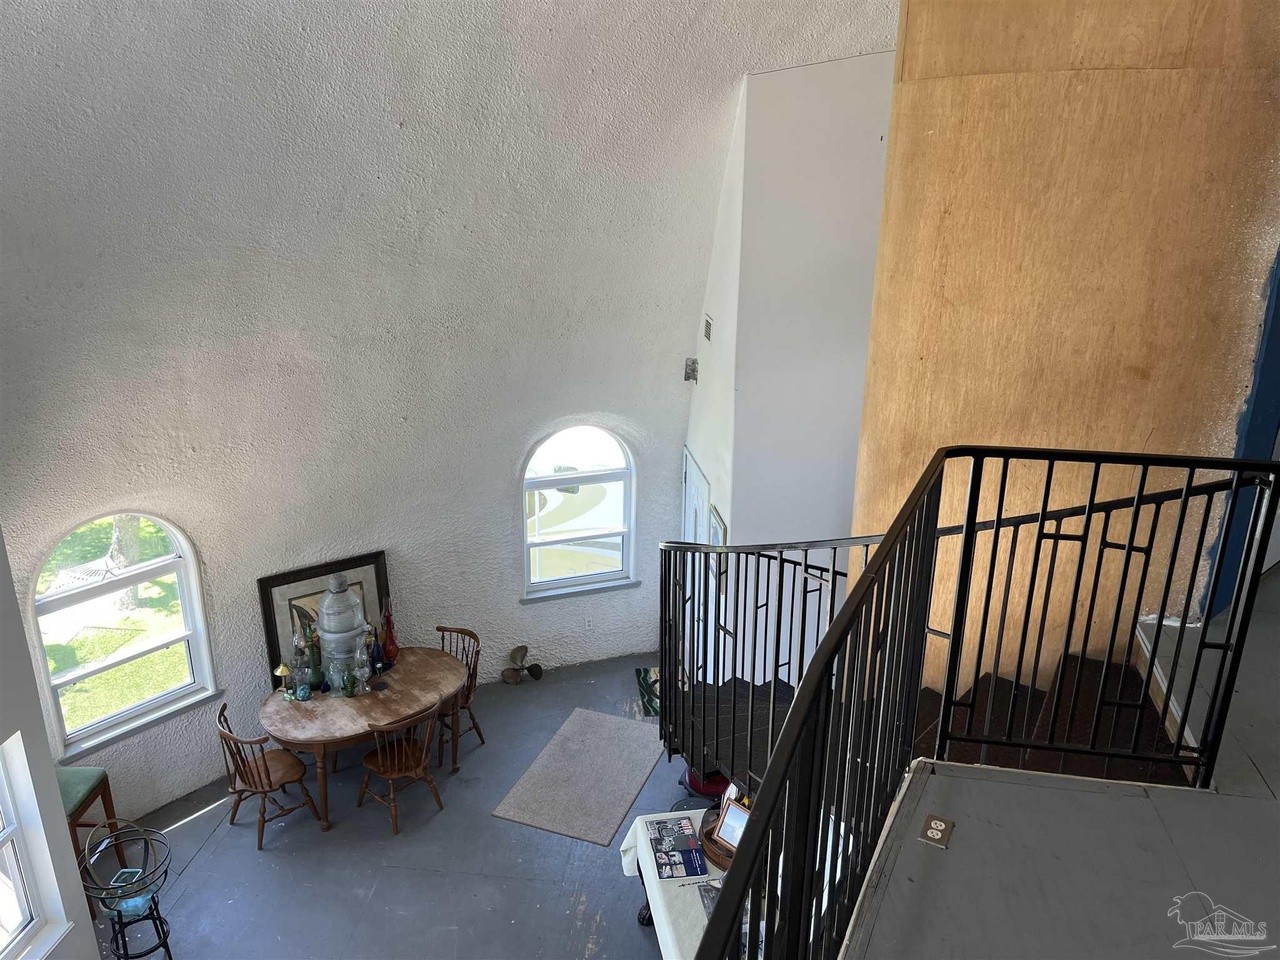 A rare Monolithic dome home is now for sale in Florida